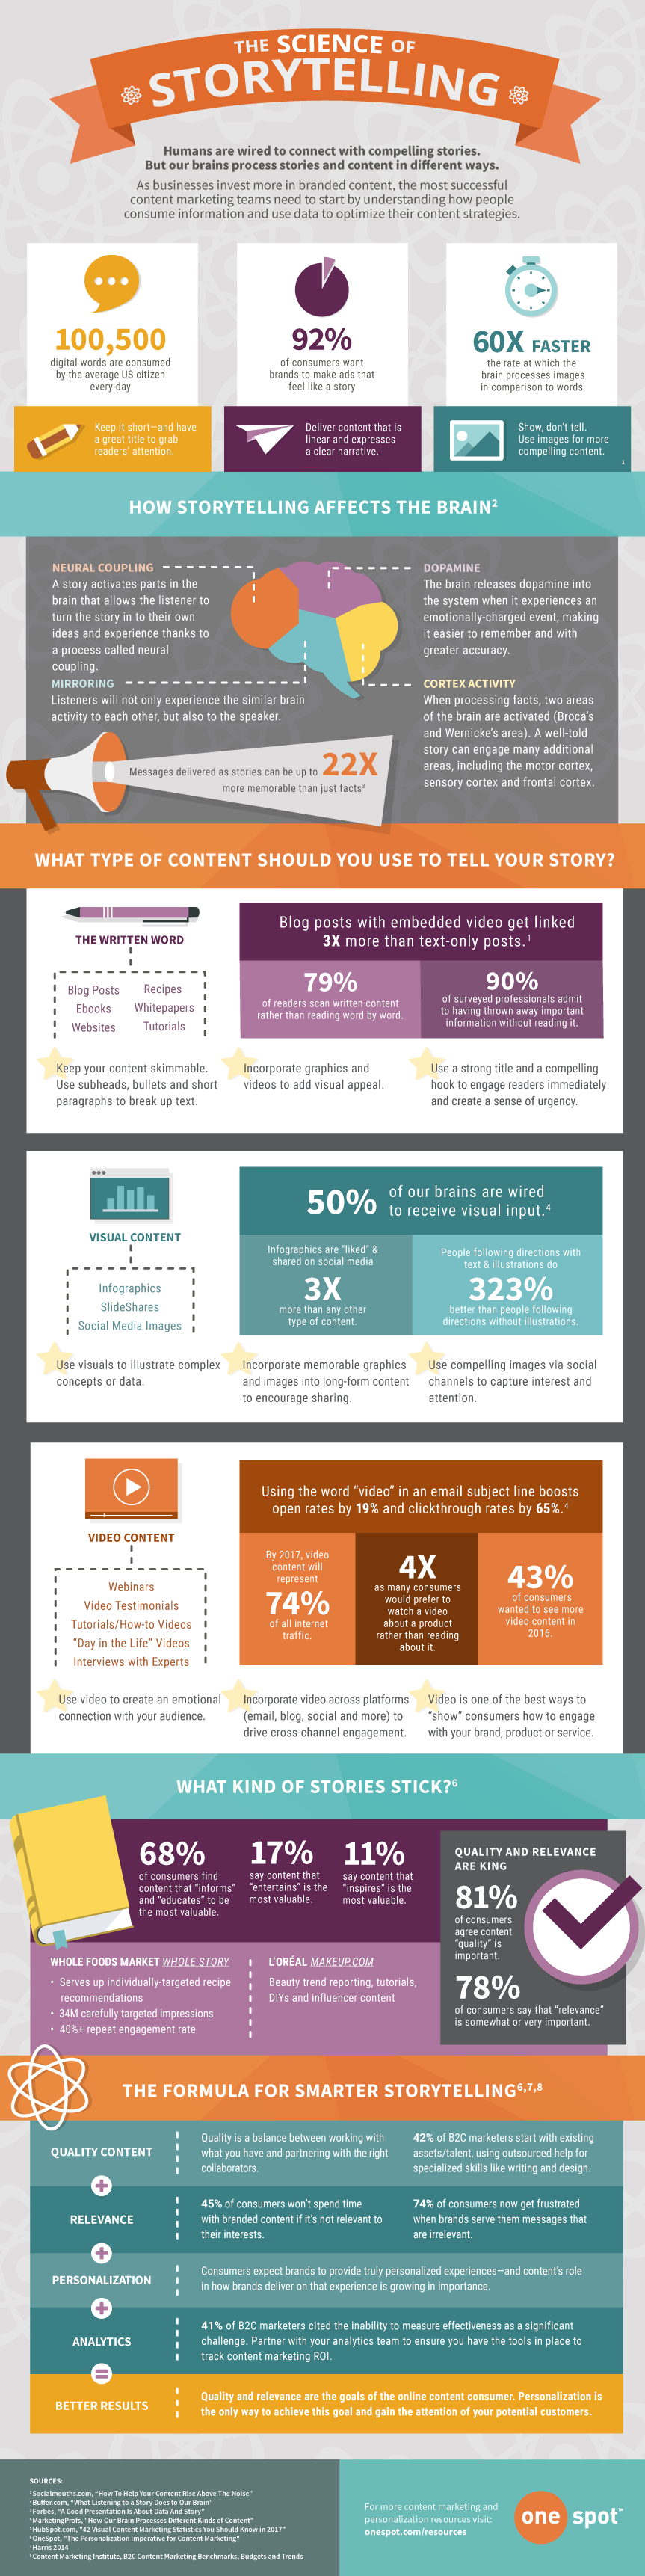 INFOGRAPHIC: The Science of Storytelling